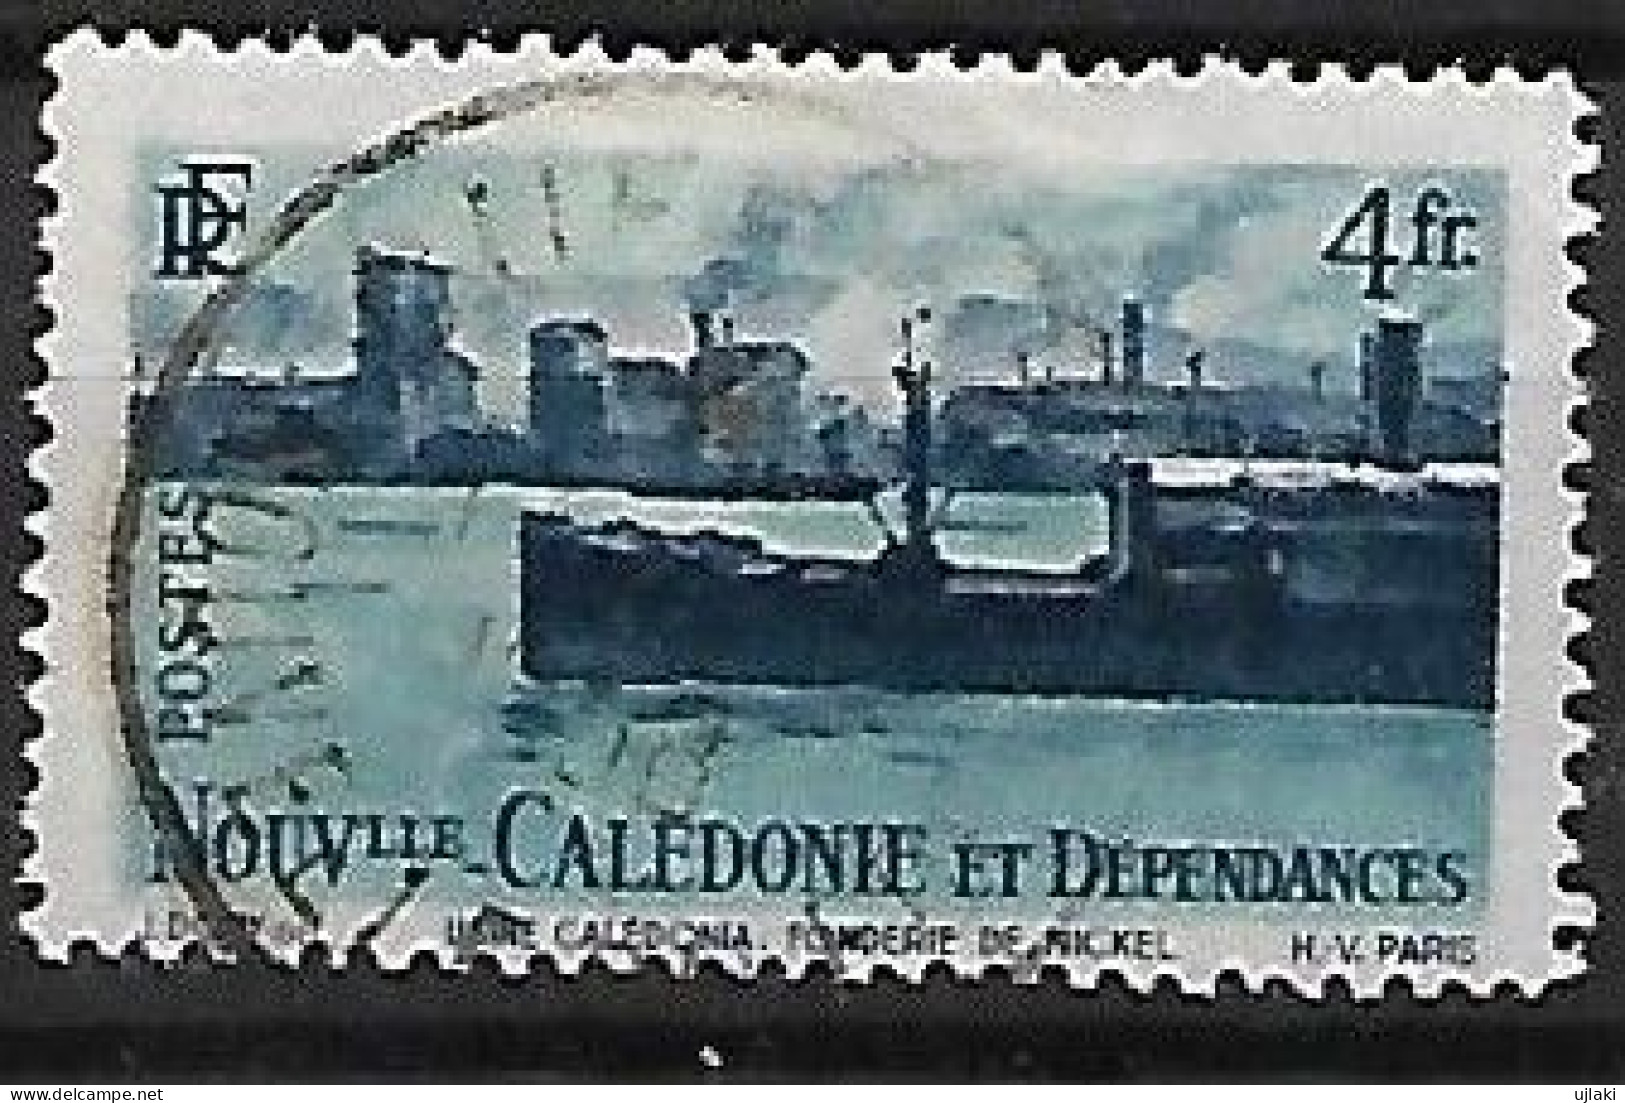 NOUVELLE CALEDONIE: Série Courante: Fonderie De Nickel   N°271  Année:1948. - Used Stamps